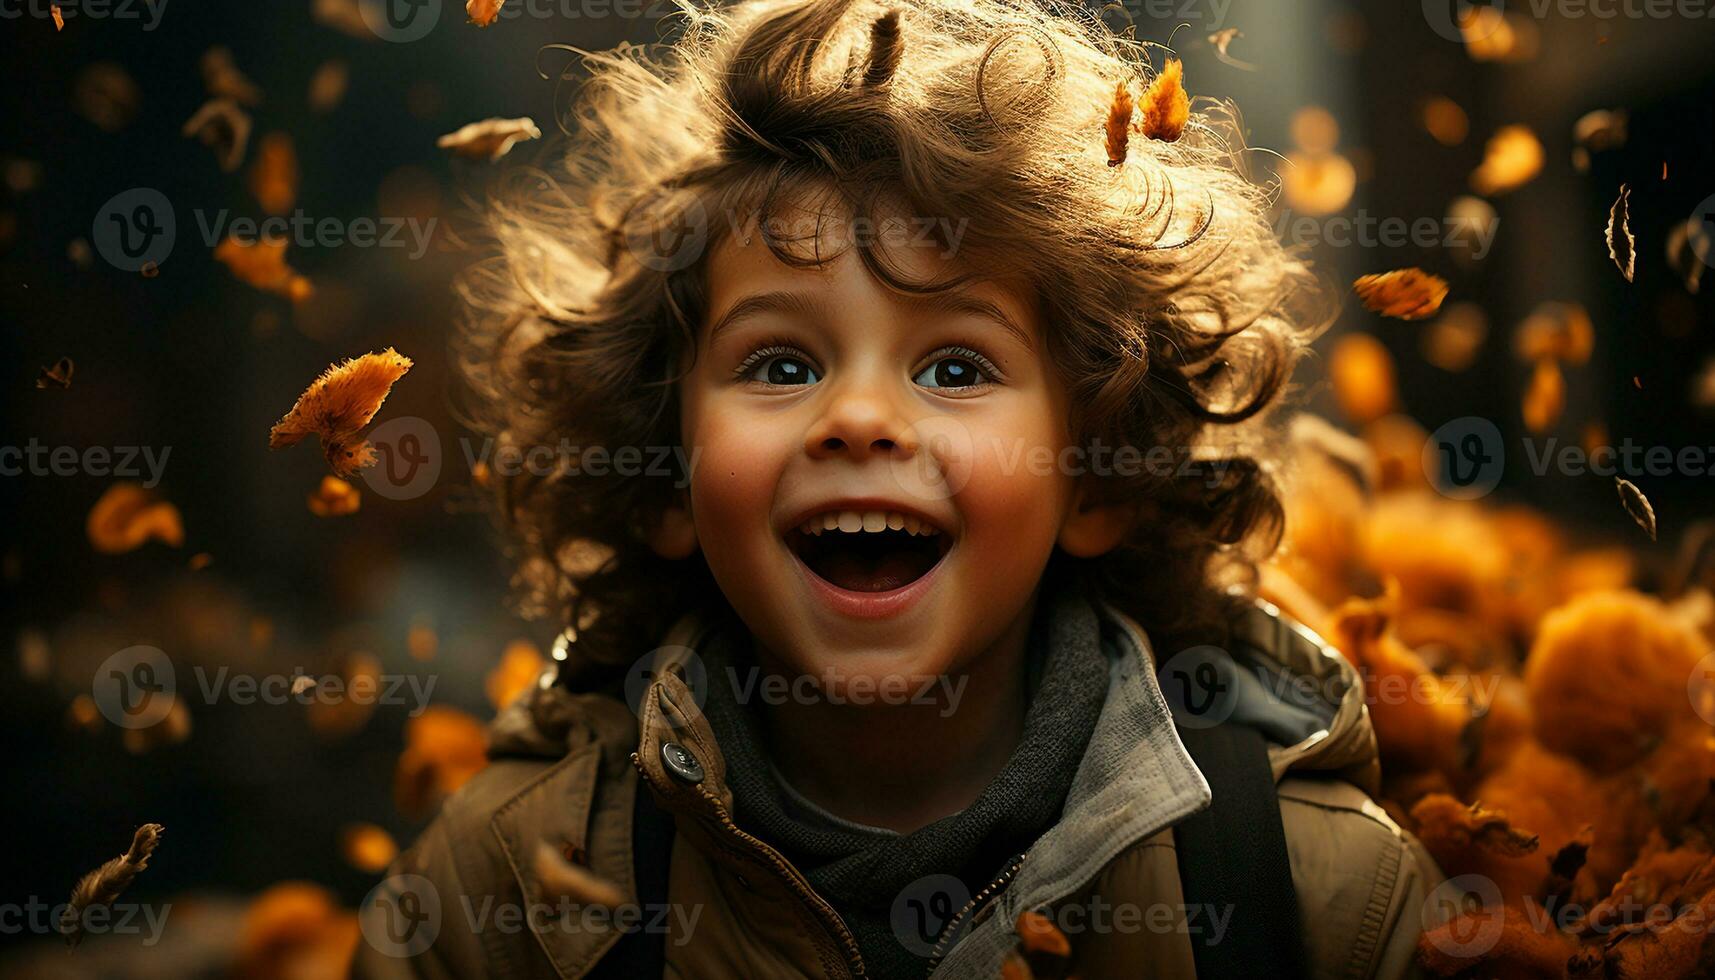 A cute, smiling child enjoys autumn outdoors, surrounded by nature generated by AI photo